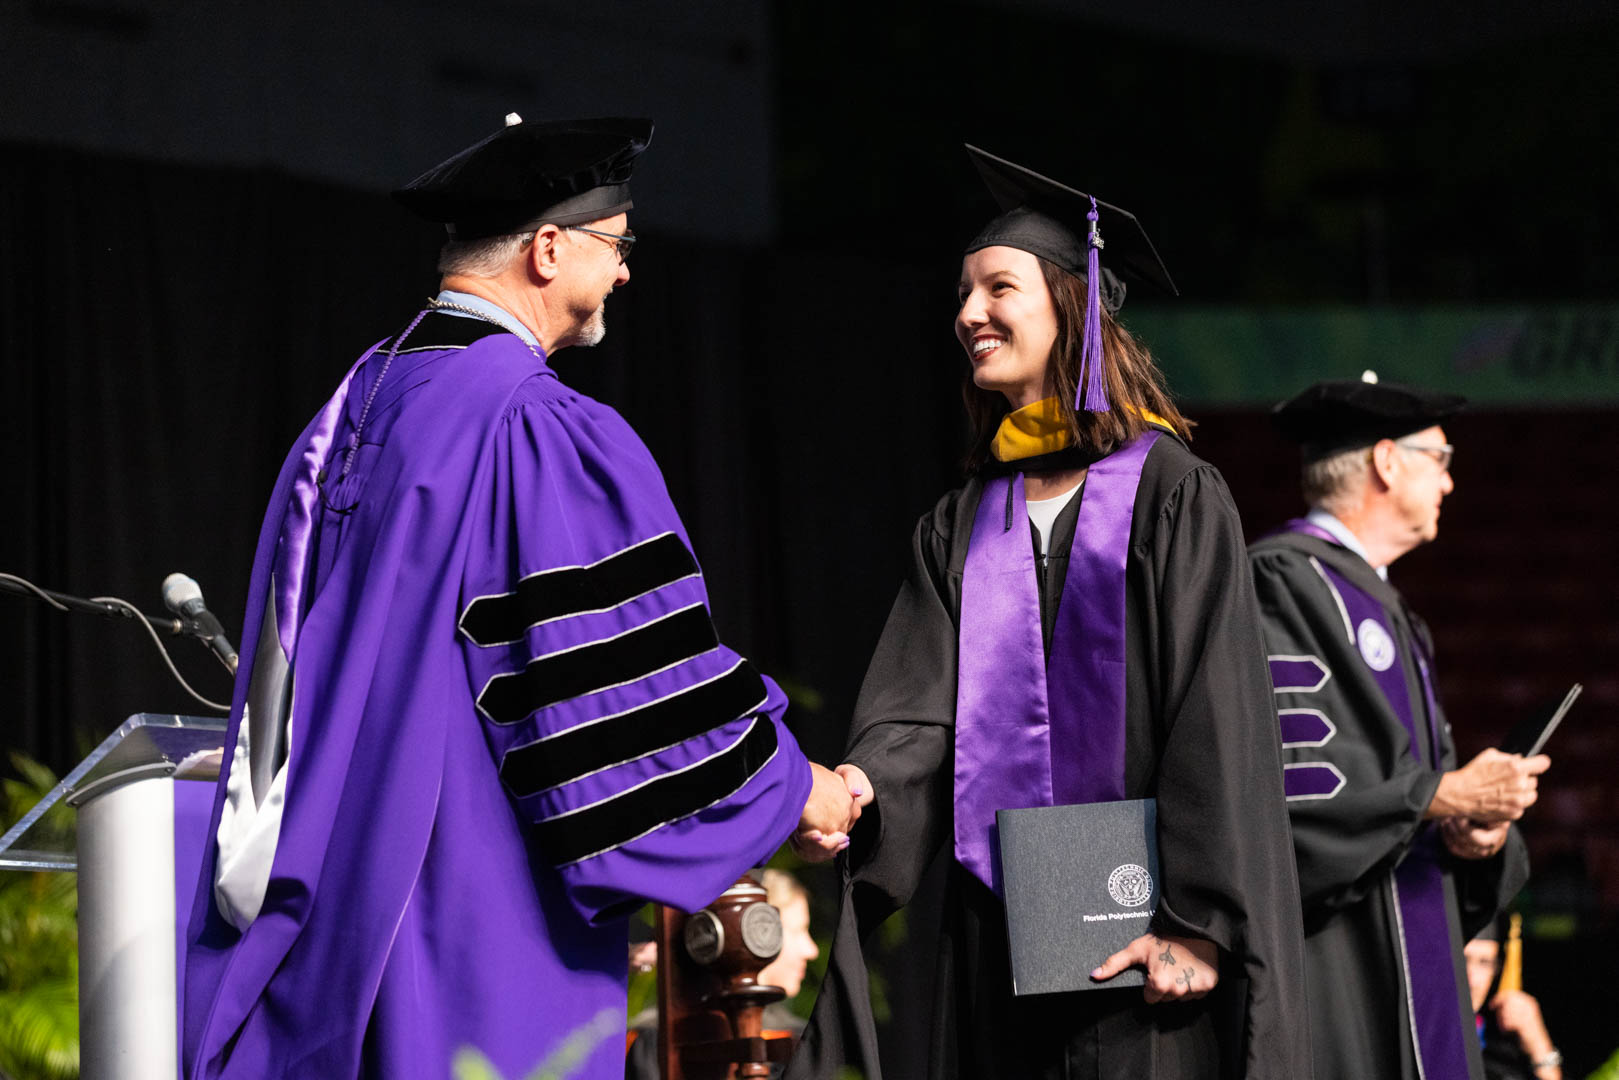 Graduate Isabel Zimmerman receives her master’s degree in data science during Florida Polytechnic University’s 2023 commencement at the RP Funding Center in Lakeland, Florida, on Sunday, May 7. More than 200 students received their degrees at the graduation ceremony.